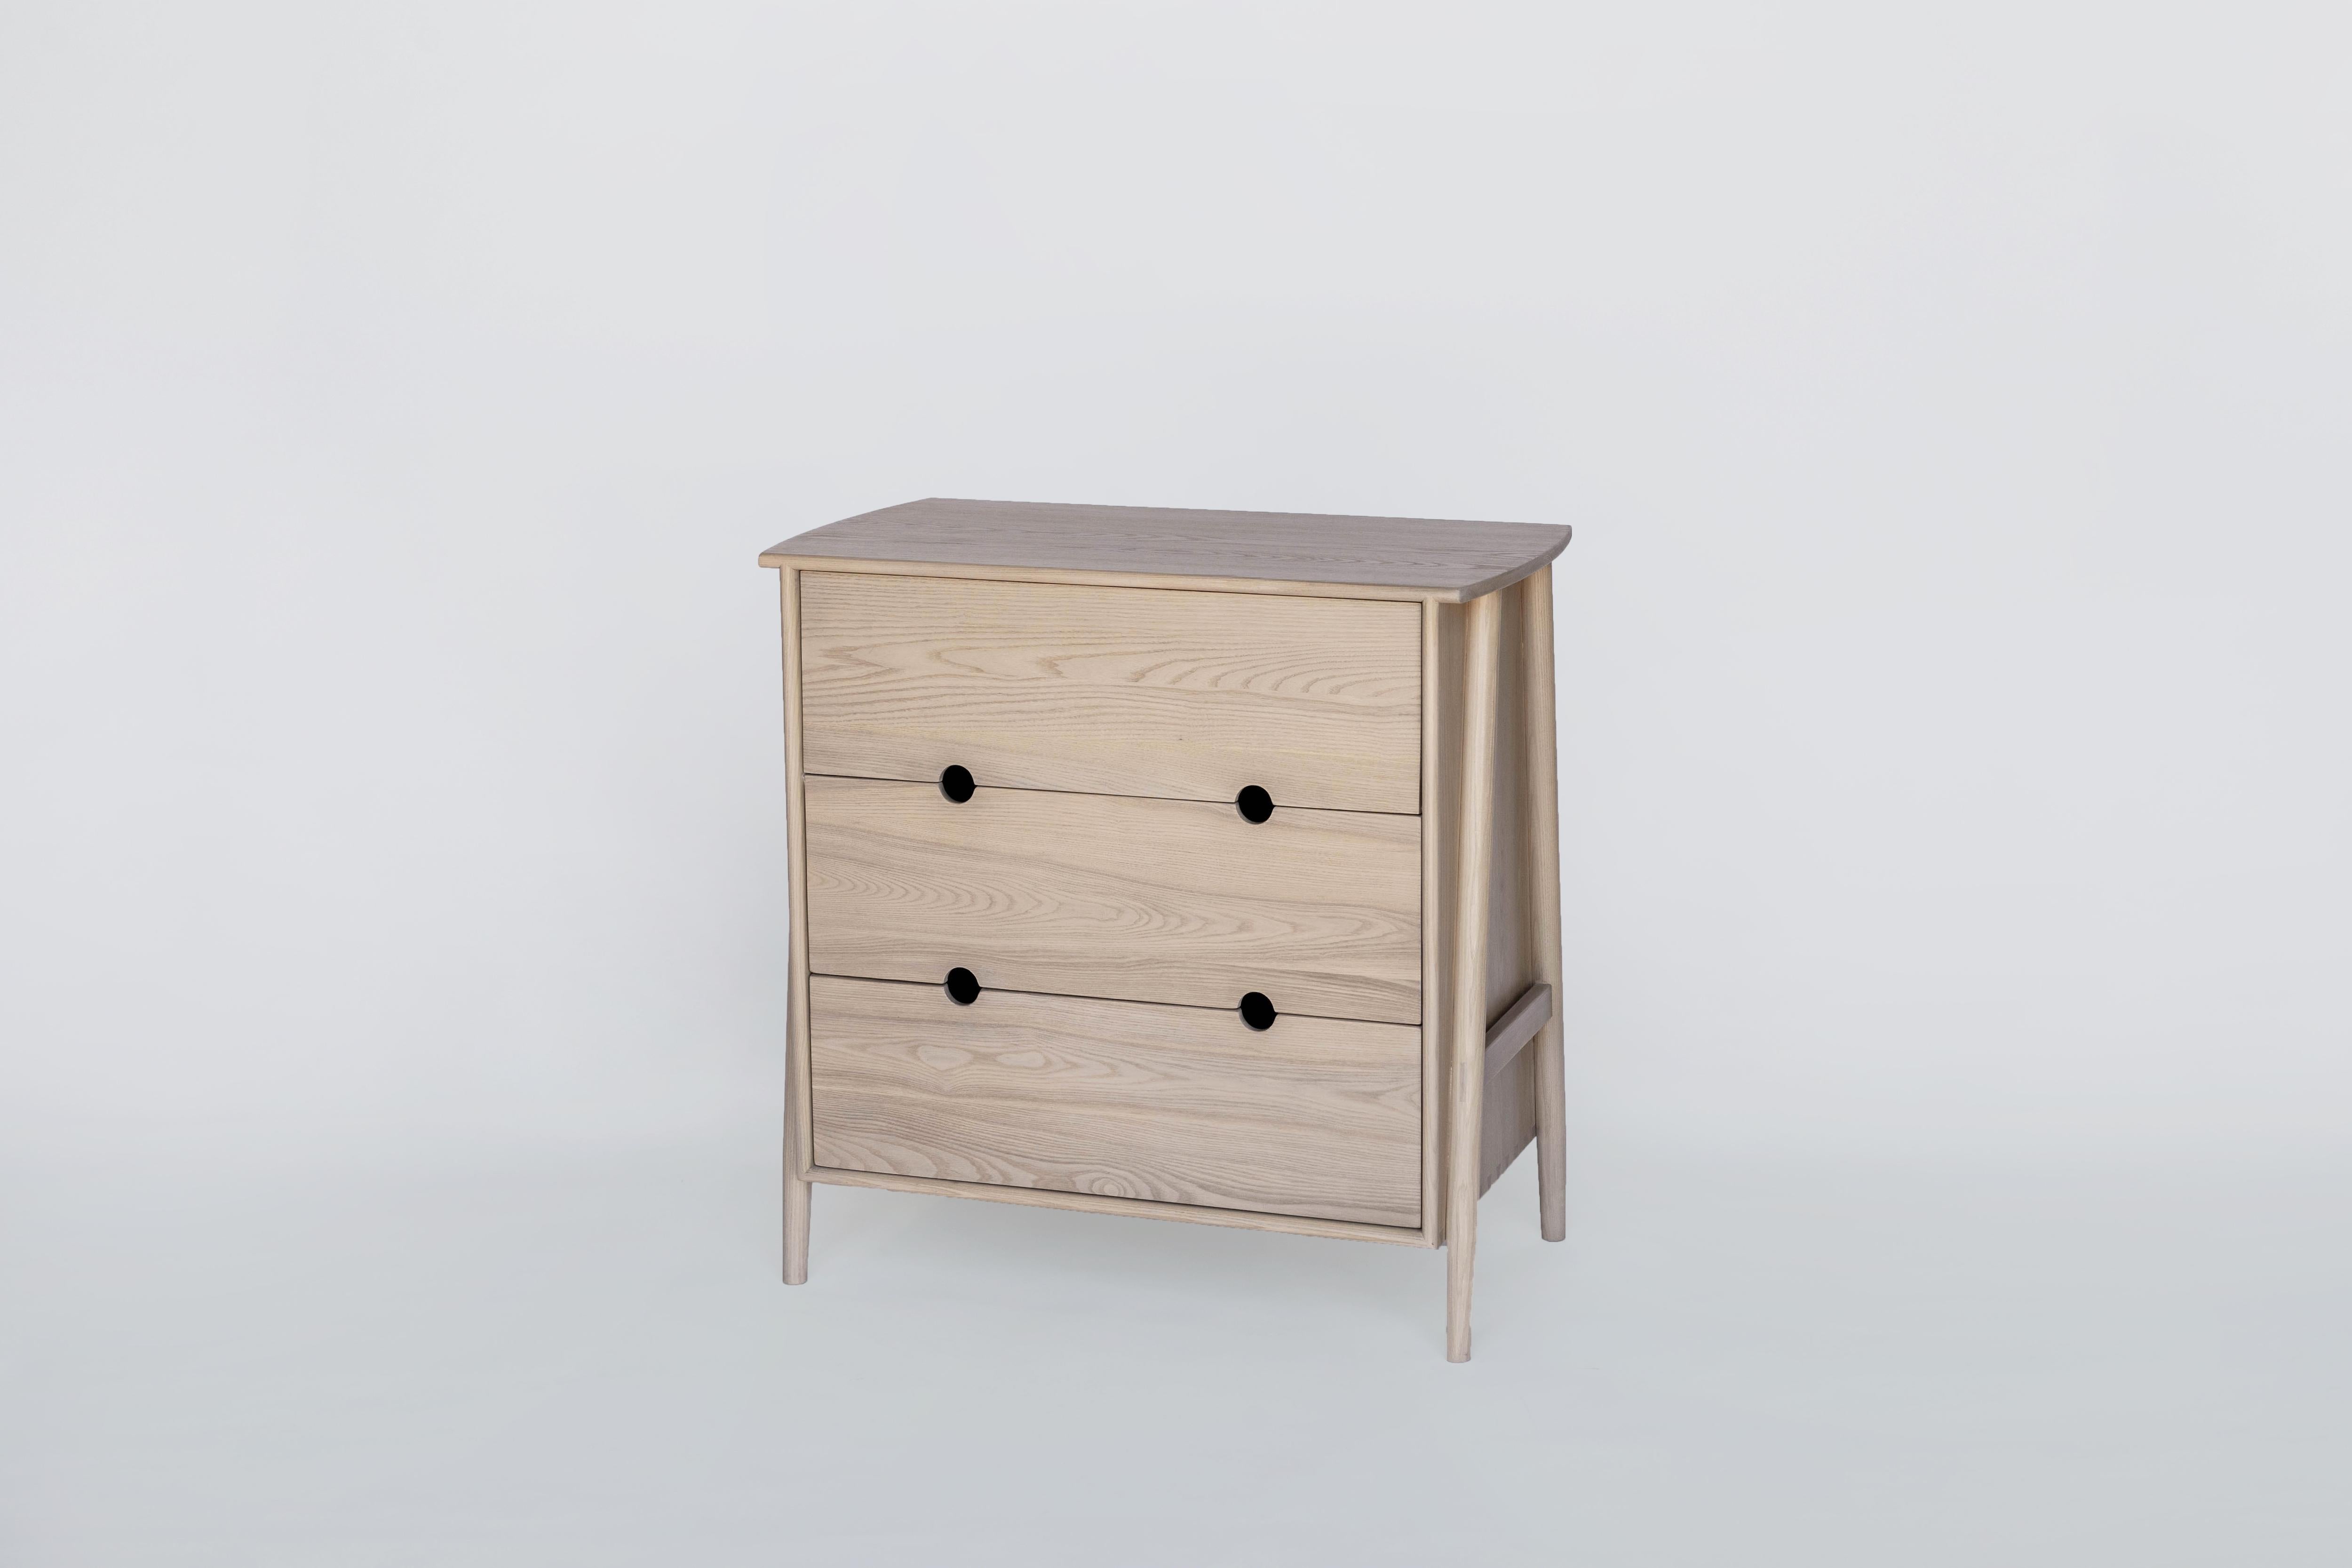 Sun at six is a contemporary furniture design studio that works with traditional Chinese joinery masters to handcraft our pieces using traditional joinery. 

Great furniture begins with quality materials: raw, sustainably sourced white oak, our